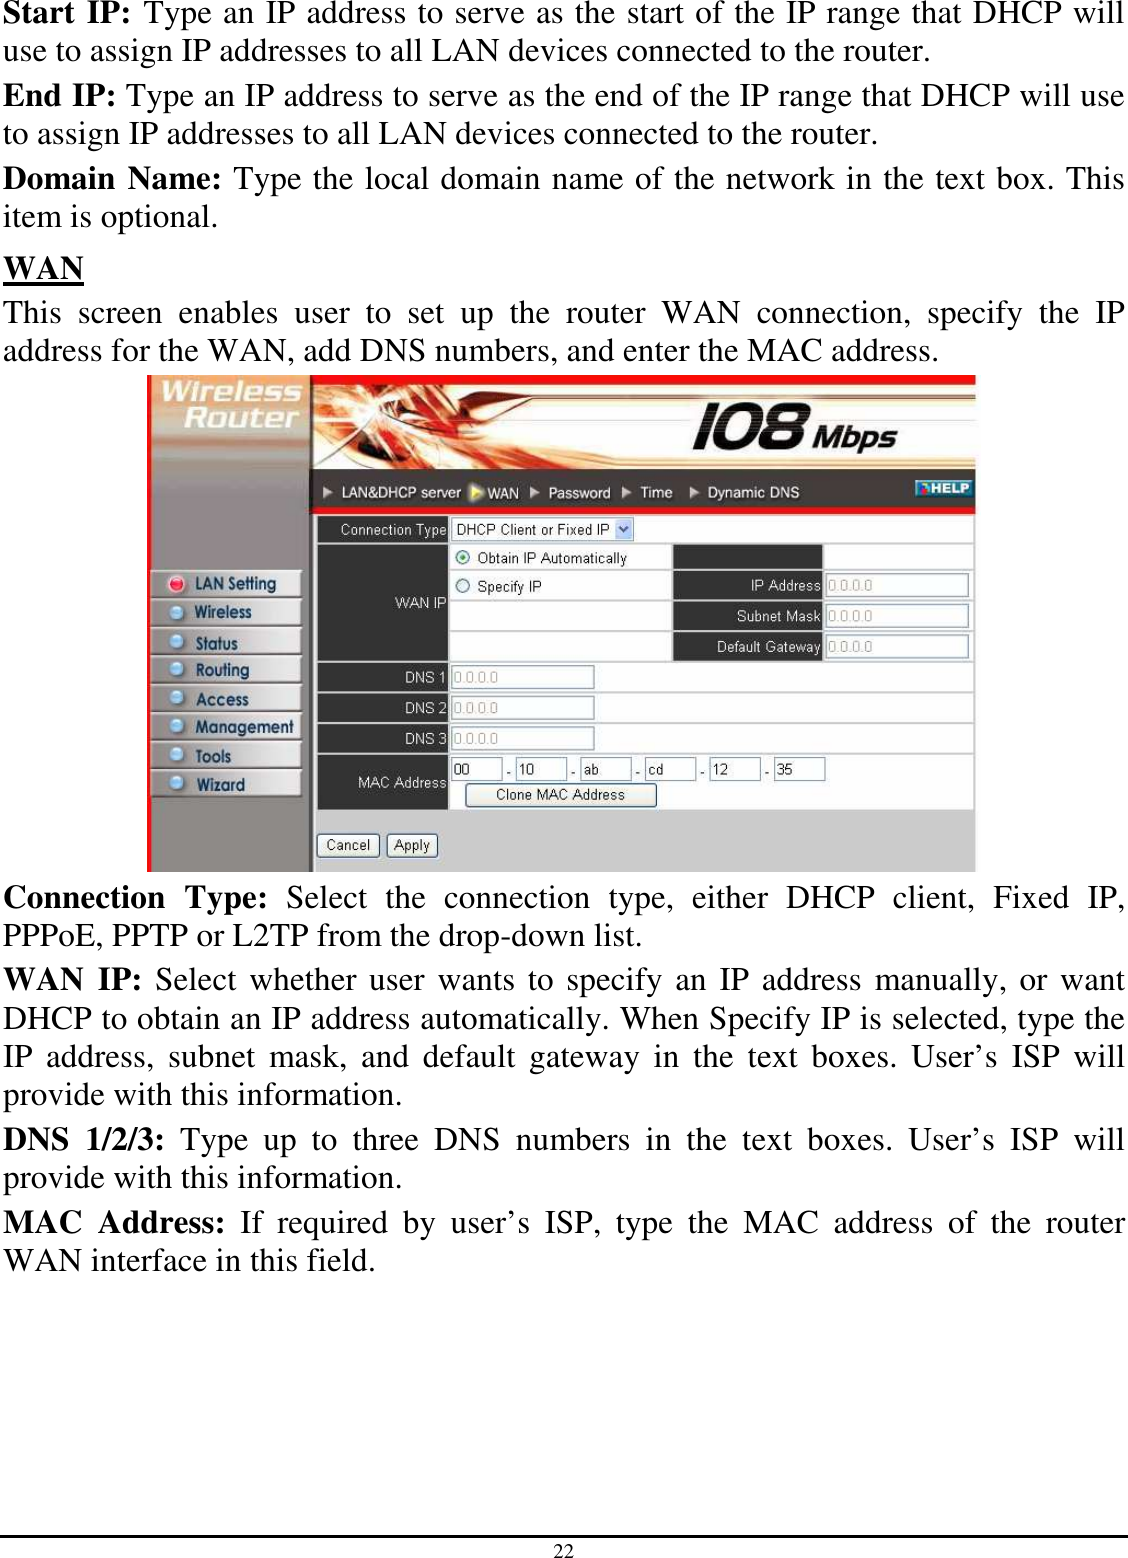 22 Start IP: Type an IP address to serve as the start of the IP range that DHCP will use to assign IP addresses to all LAN devices connected to the router. End IP: Type an IP address to serve as the end of the IP range that DHCP will use to assign IP addresses to all LAN devices connected to the router. Domain Name: Type the local domain name of the network in the text box. This item is optional. WAN This  screen  enables  user  to  set  up  the  router  WAN  connection,  specify  the  IP address for the WAN, add DNS numbers, and enter the MAC address.  Connection  Type:  Select  the  connection  type,  either  DHCP  client,  Fixed  IP, PPPoE, PPTP or L2TP from the drop-down list. WAN IP: Select whether user wants to specify an IP address manually, or want DHCP to obtain an IP address automatically. When Specify IP is selected, type the IP  address,  subnet  mask,  and  default  gateway  in  the  text  boxes.  User’s  ISP  will provide with this information. DNS  1/2/3:  Type  up  to  three  DNS  numbers  in  the  text  boxes.  User’s  ISP  will provide with this information. MAC  Address:  If  required  by  user’s  ISP,  type  the  MAC  address  of  the  router WAN interface in this field. 